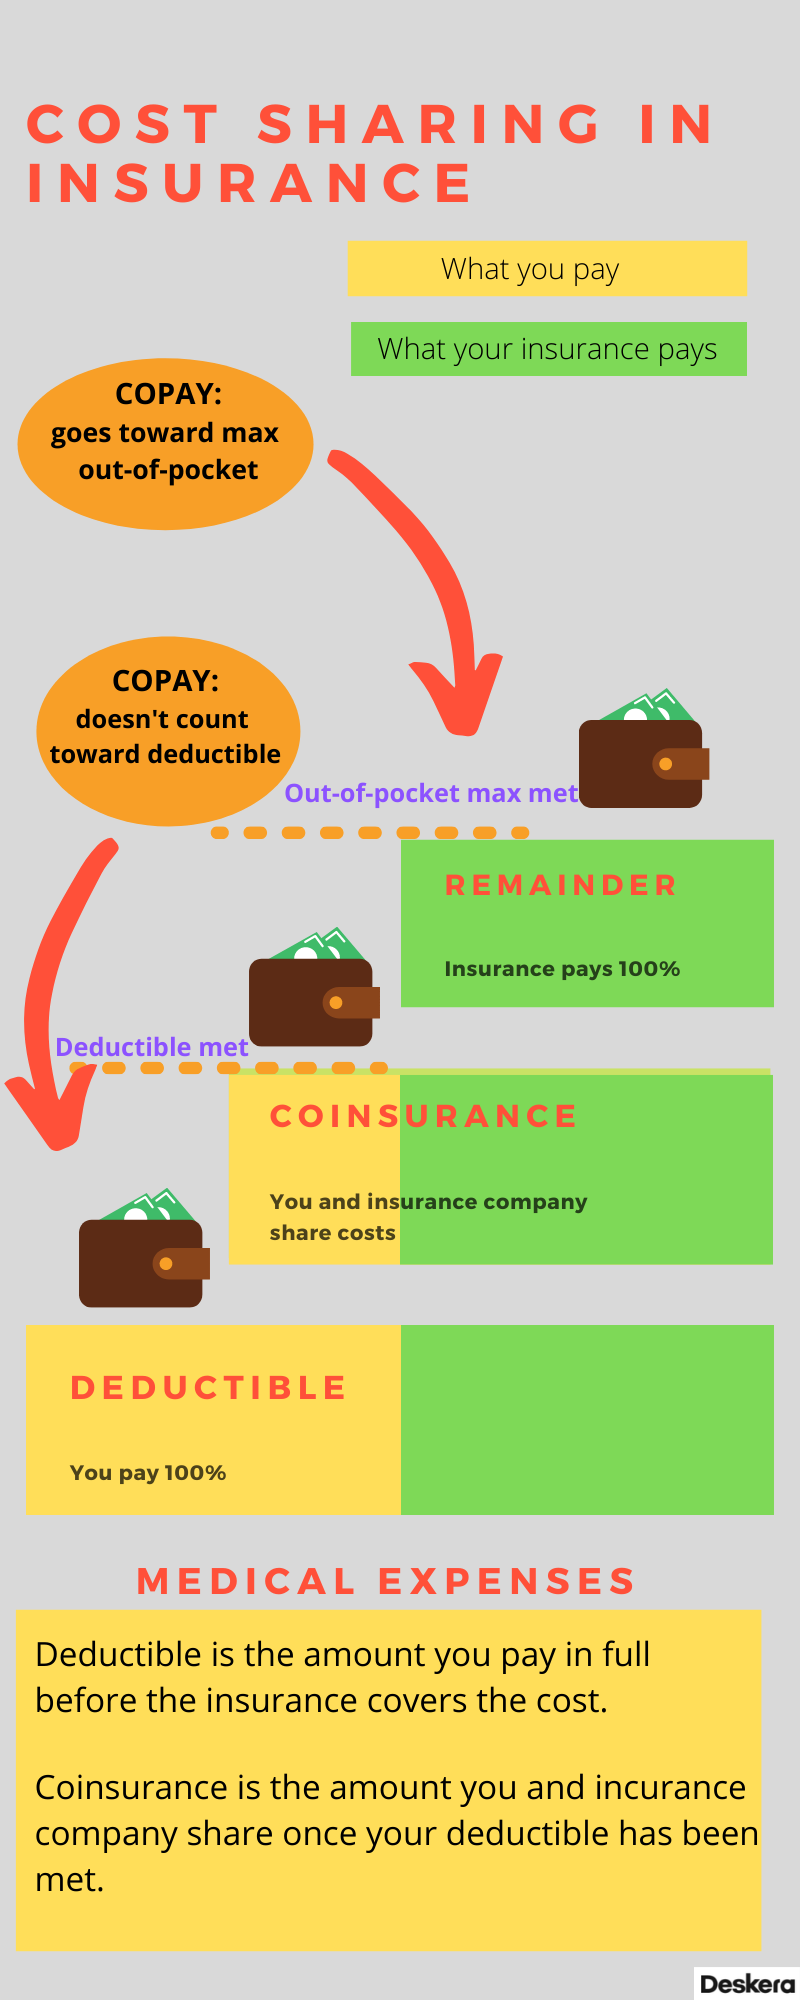 How Cost sharing works